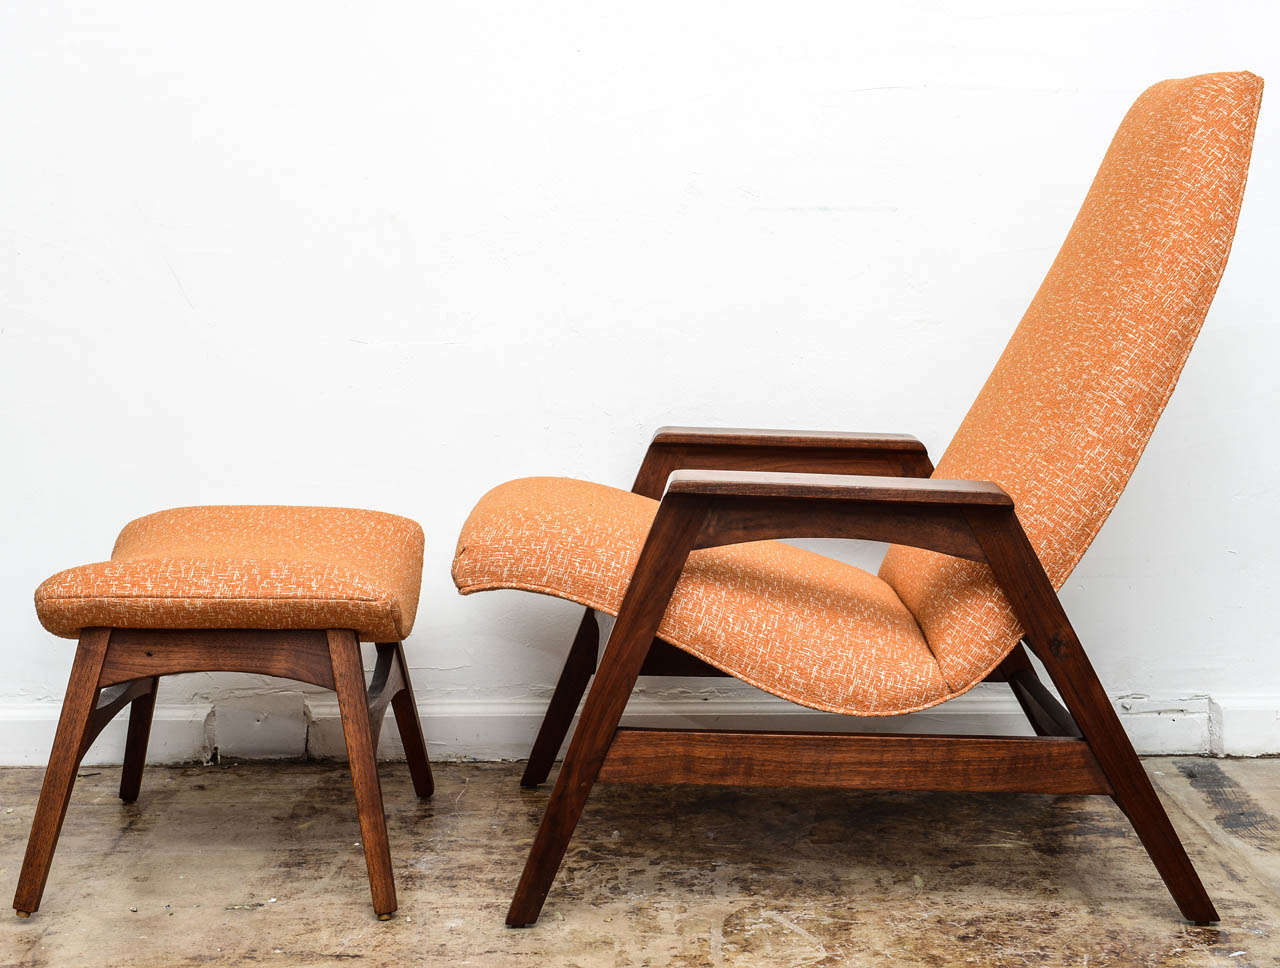 American Sculptural Mid-Century Chair and Ottoman, Attributed to Nakashima for Widdicomb